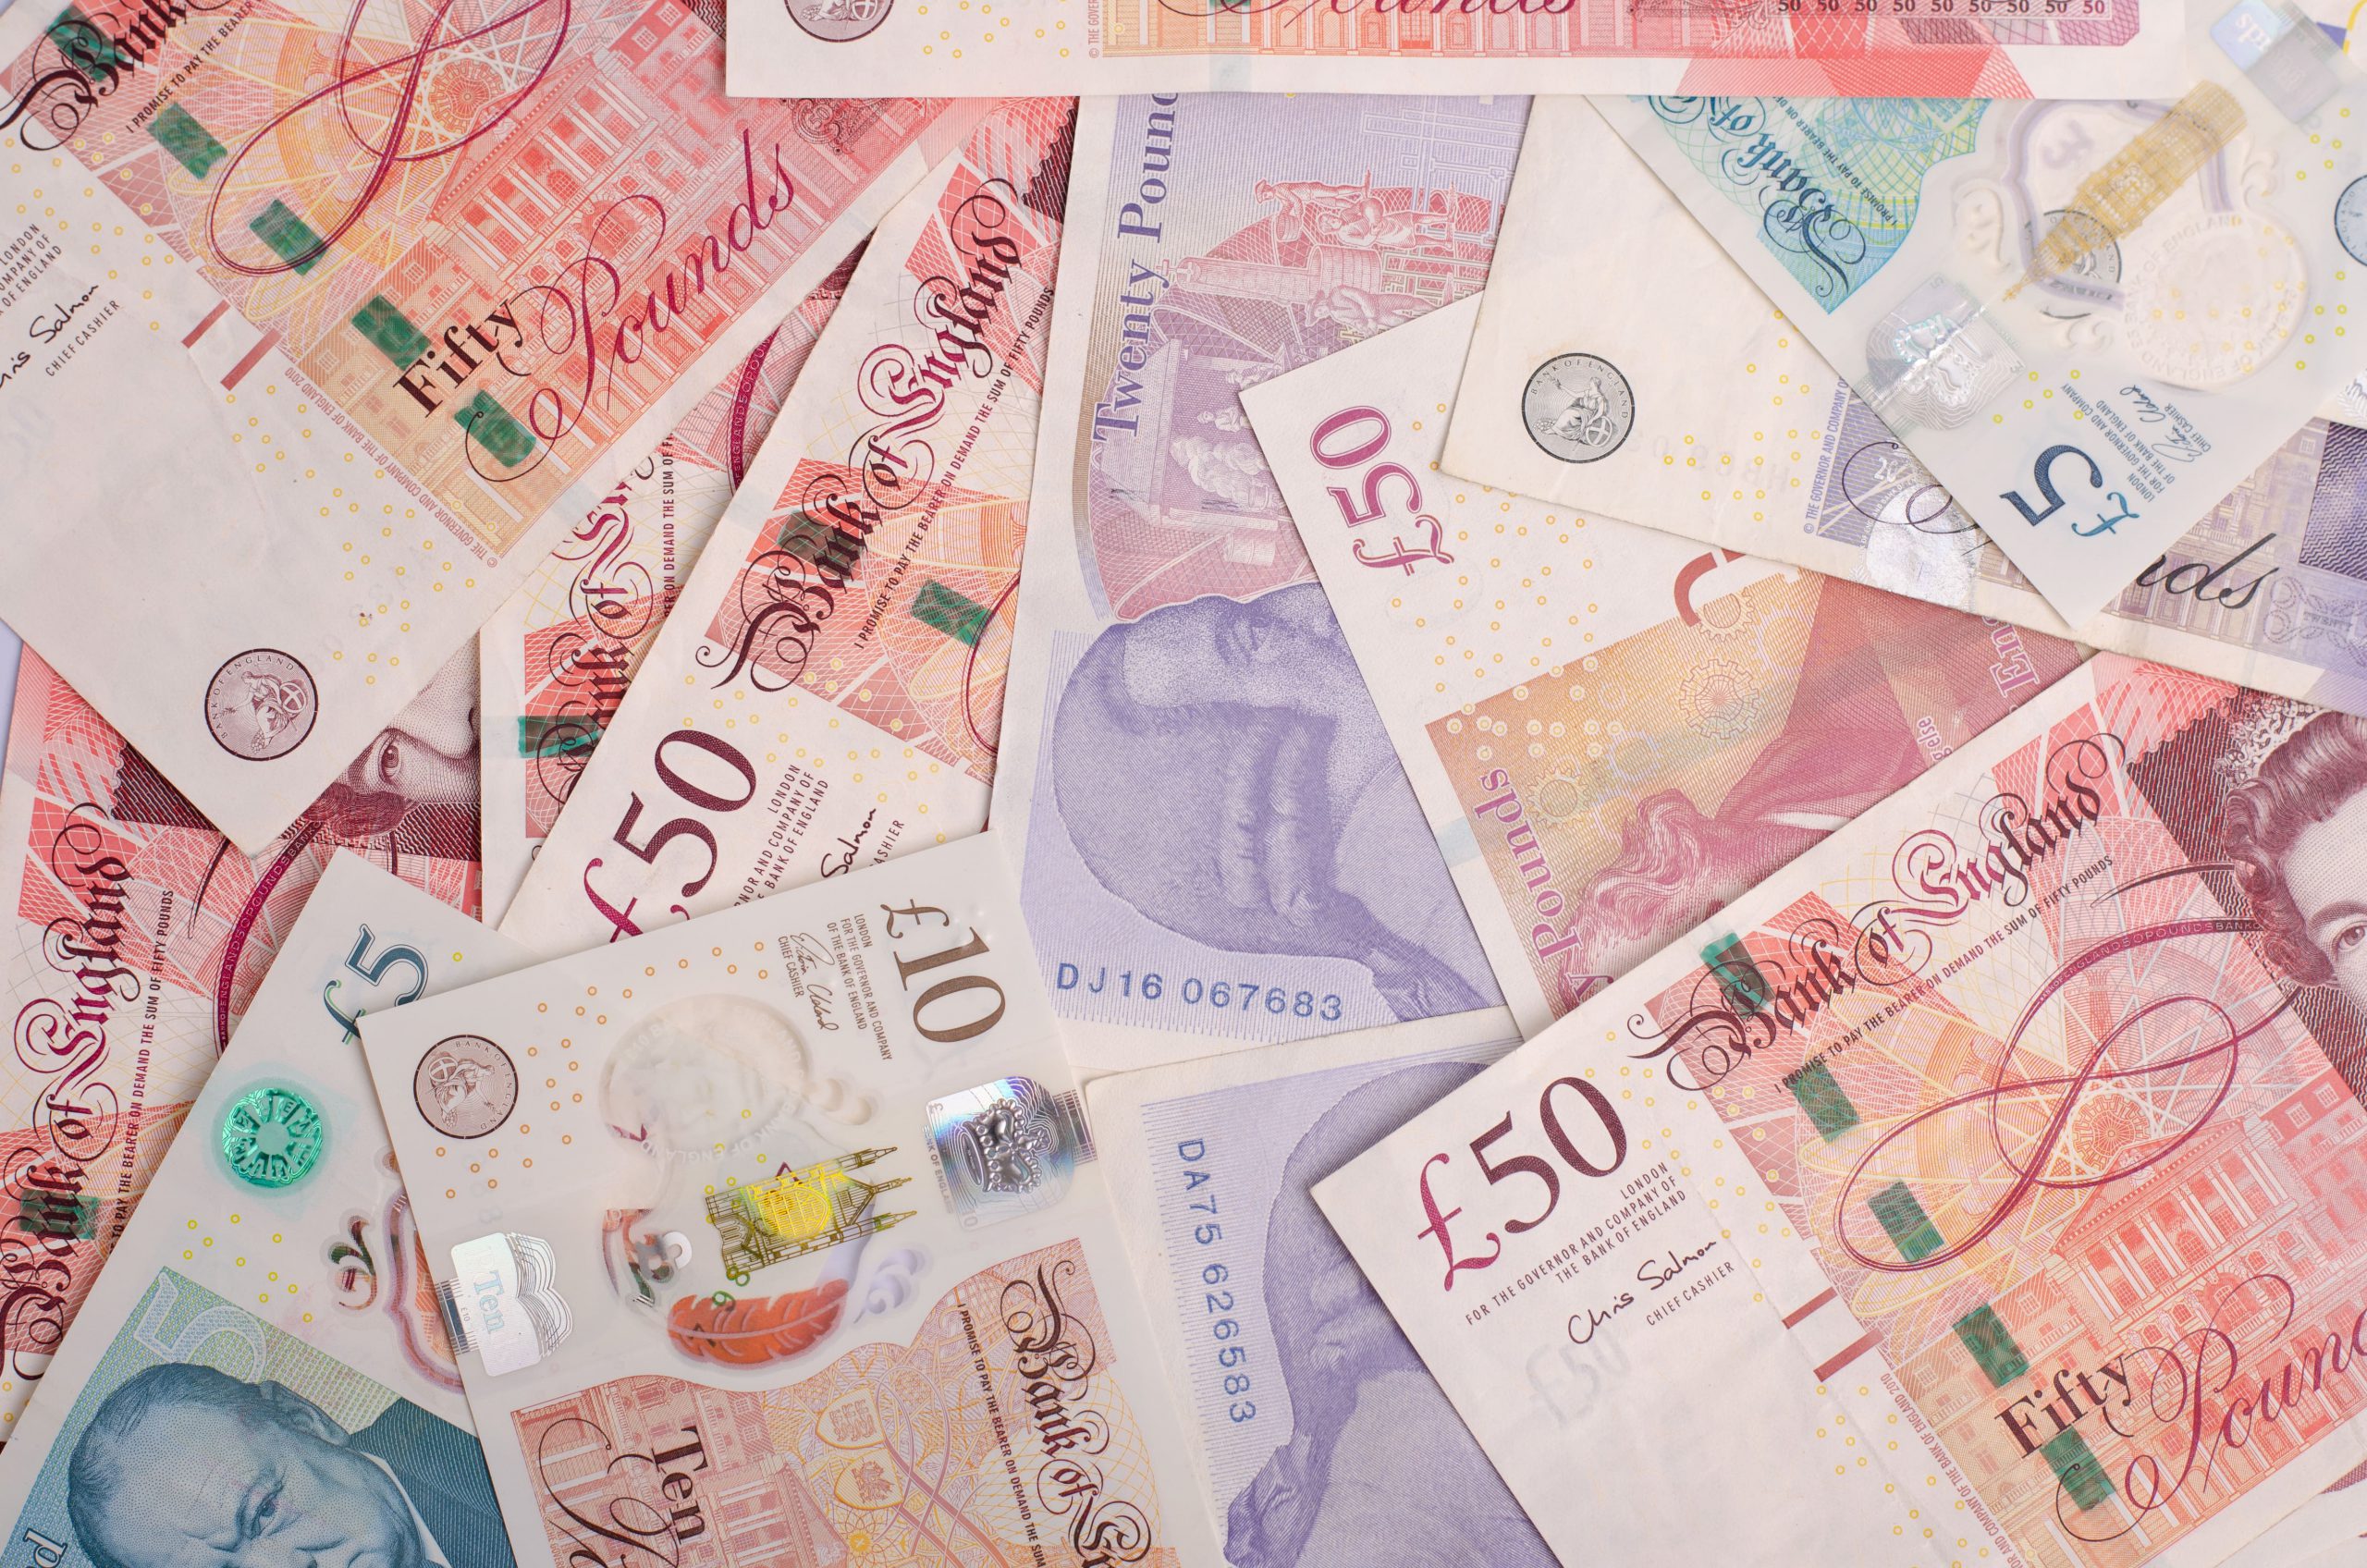 Anti-money laundering – what staff need to know, and what they don’t need to know